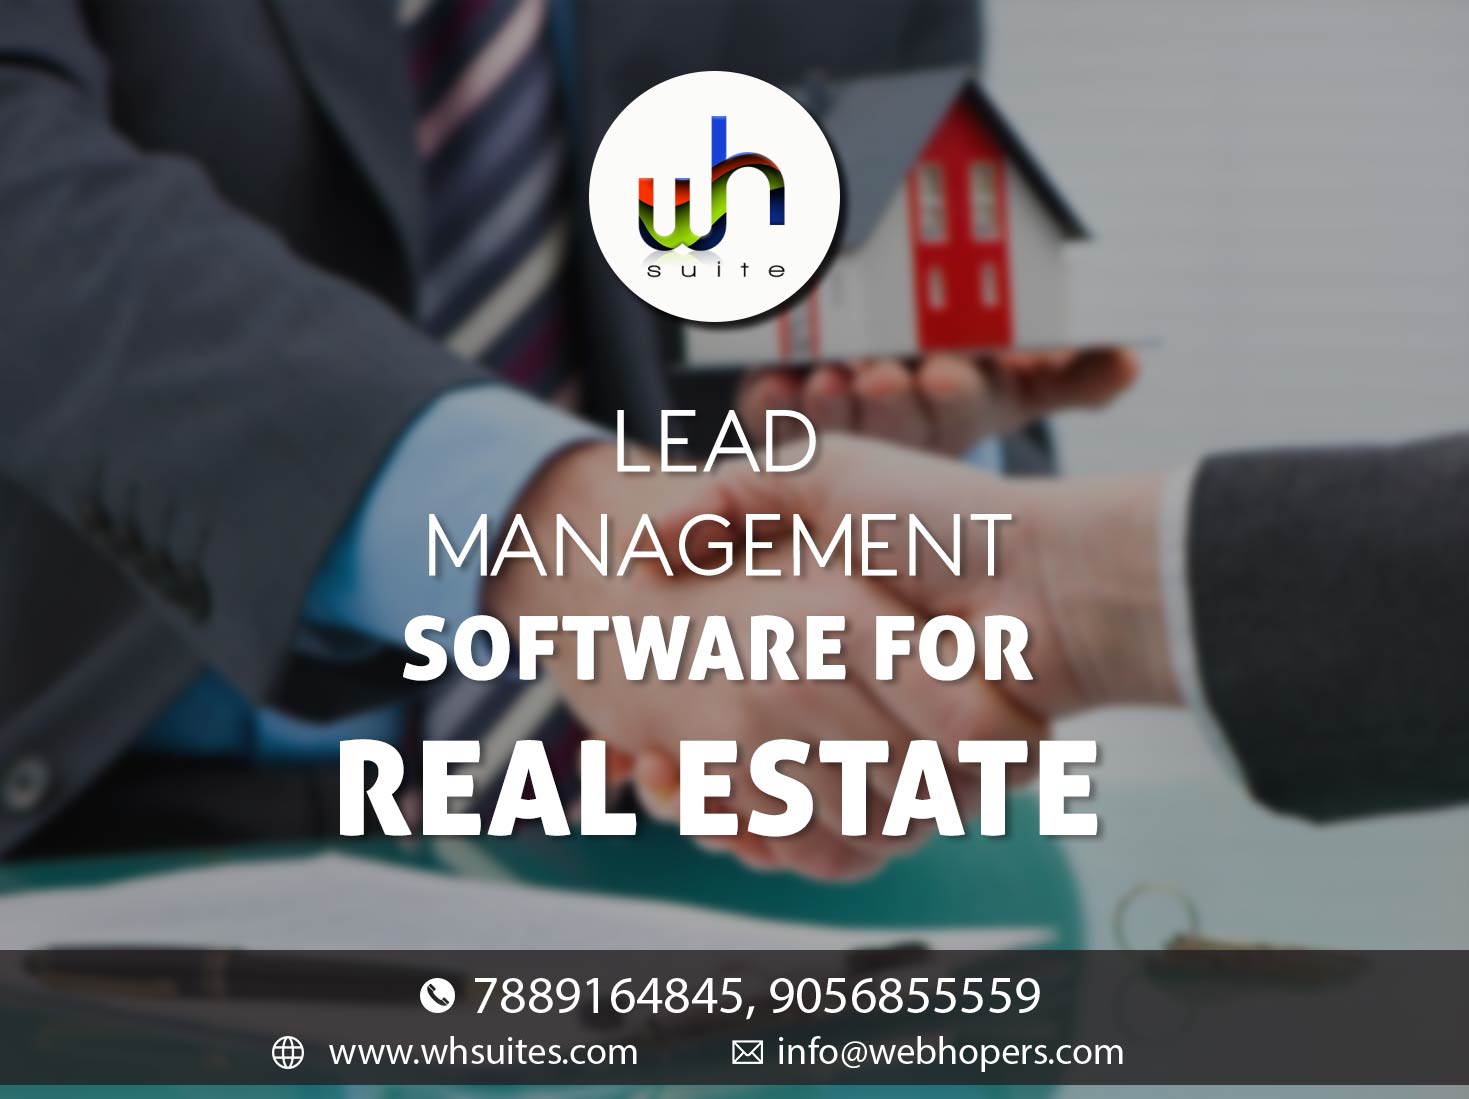 Lead management software for real estate